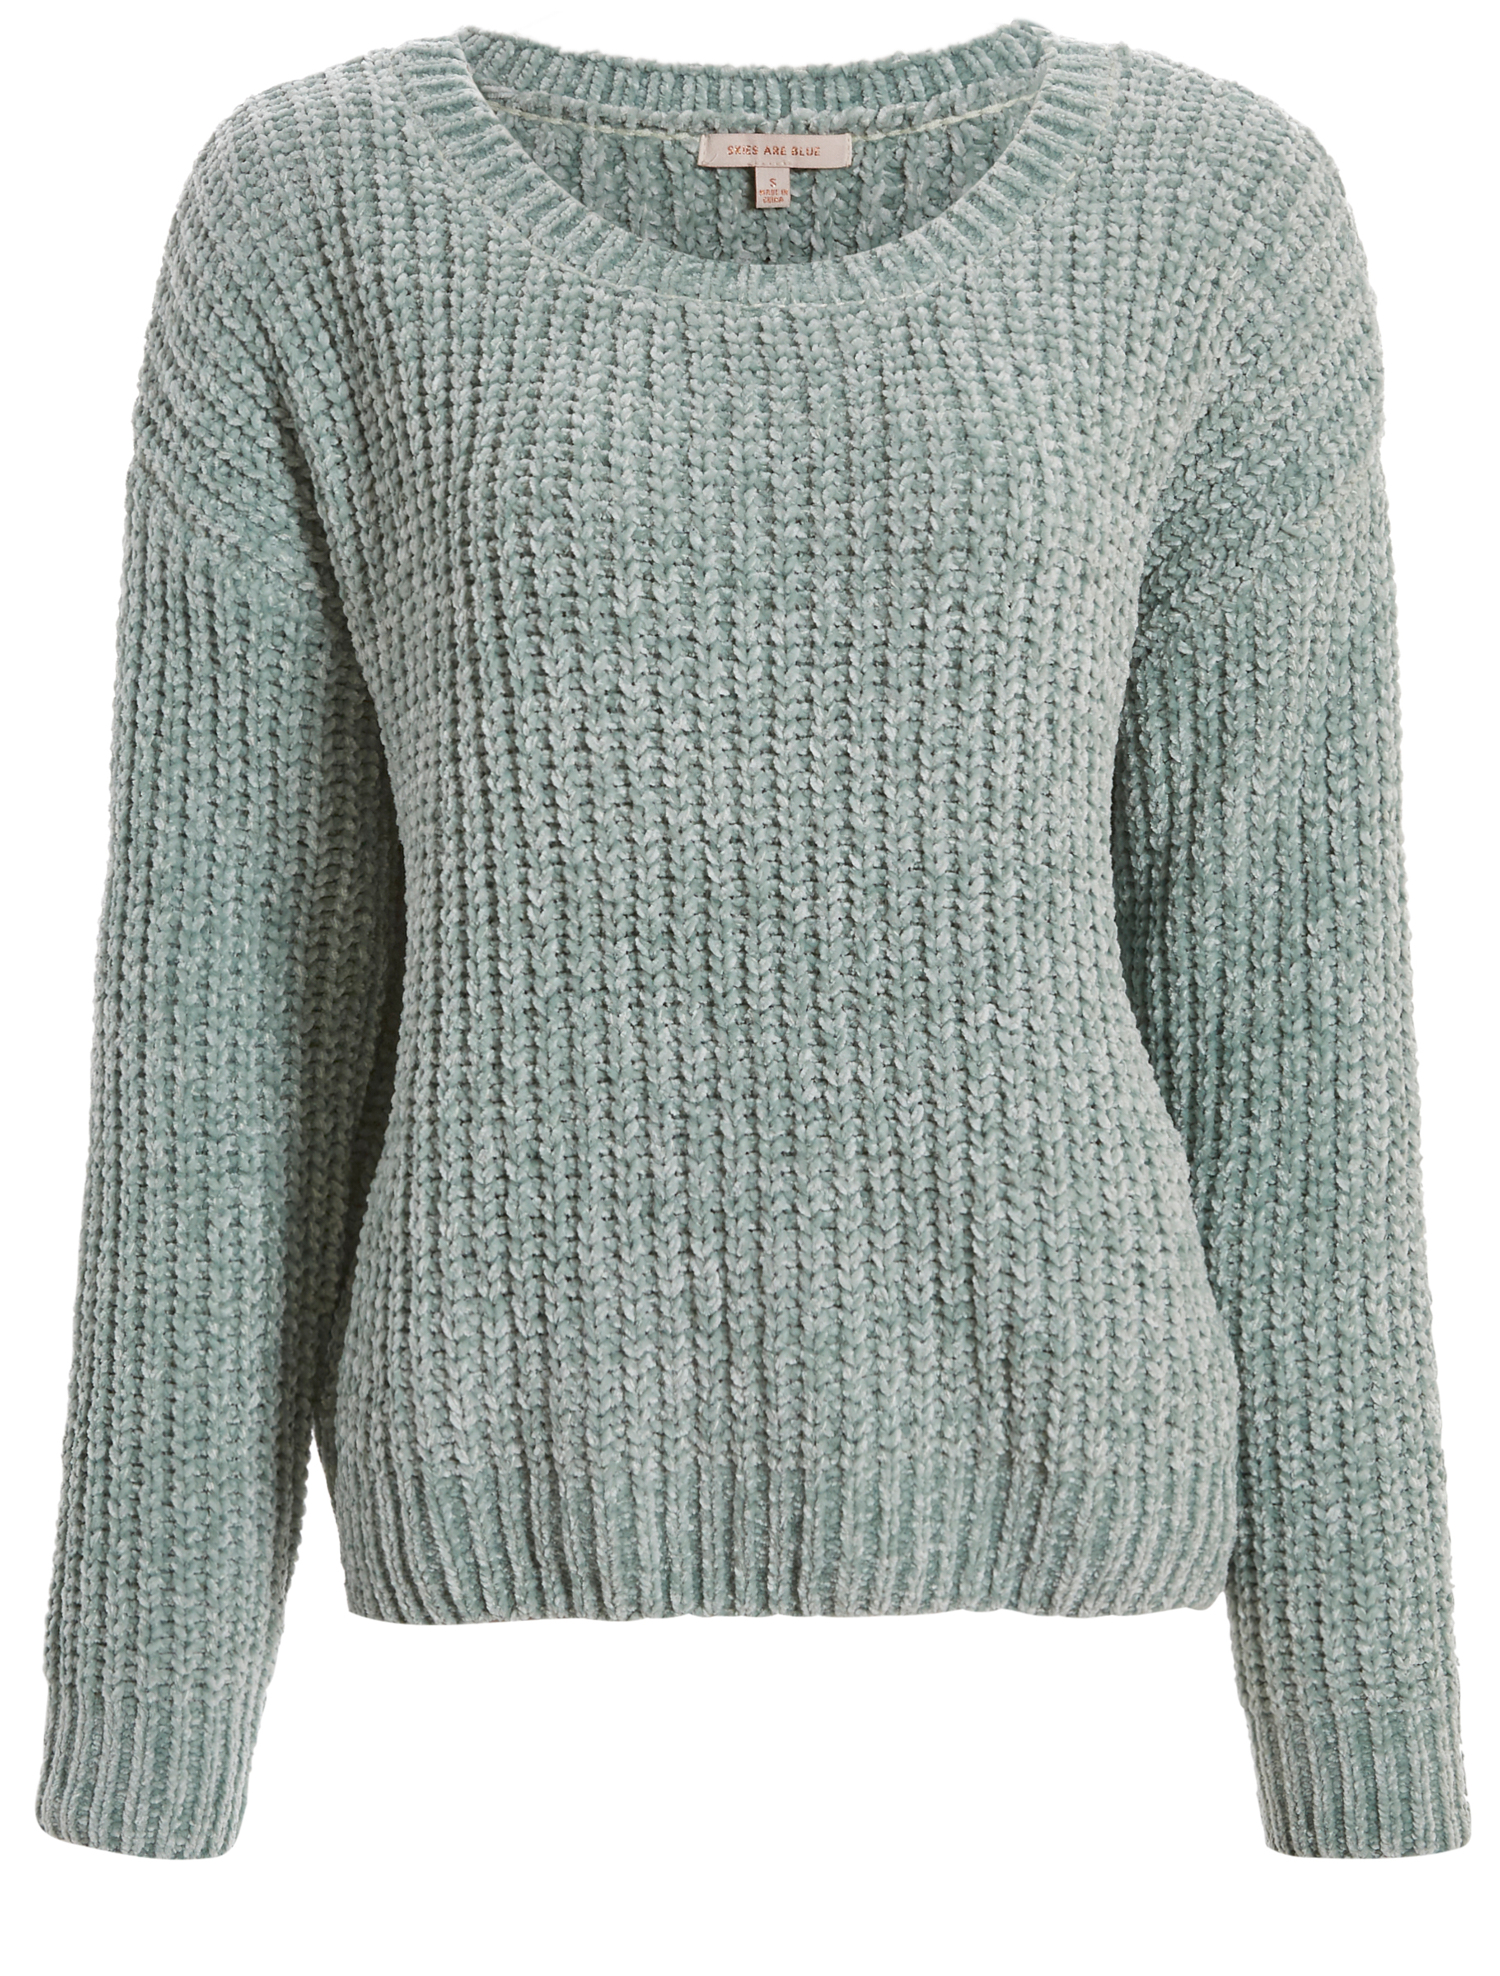 Skies are Blue Chenille Knit Sweater